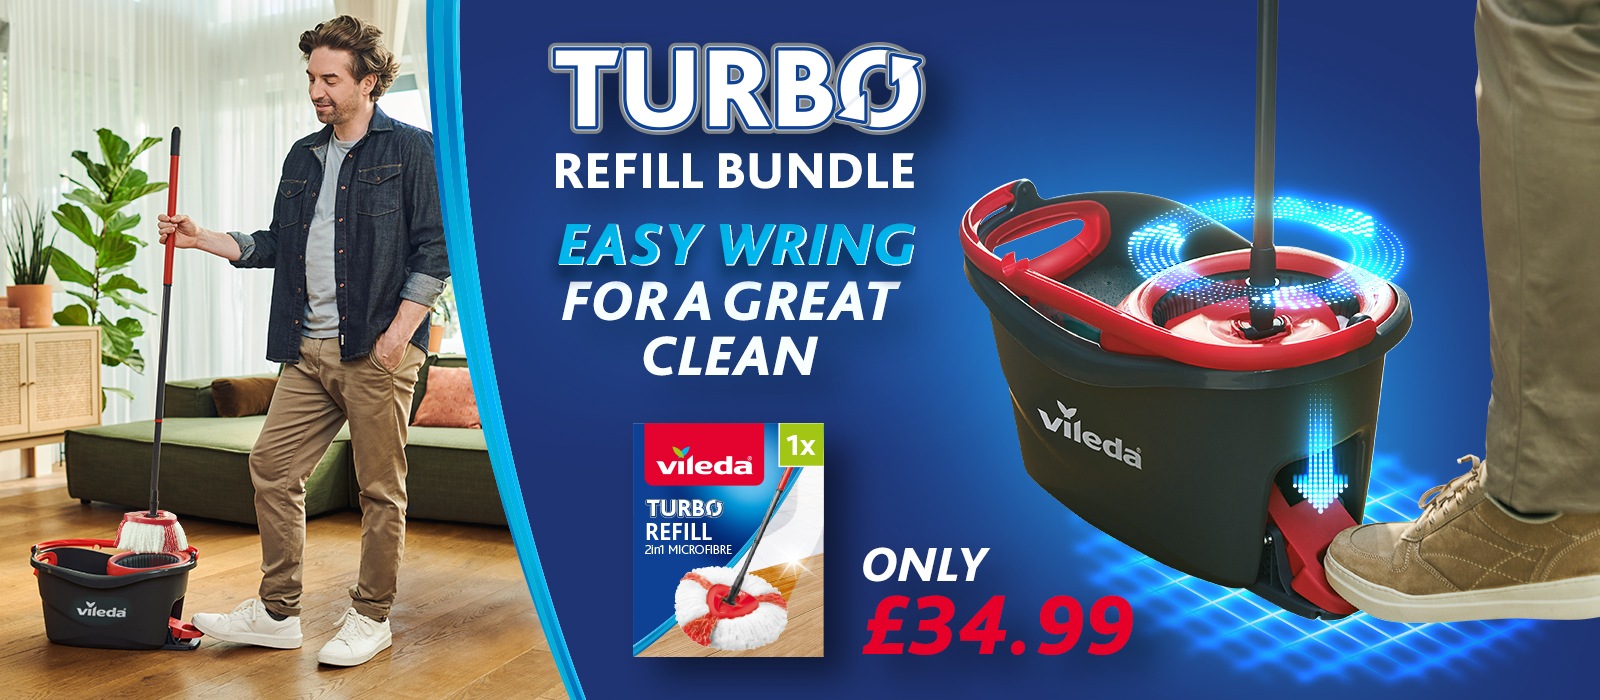 Banner promoting the turbo mop refill